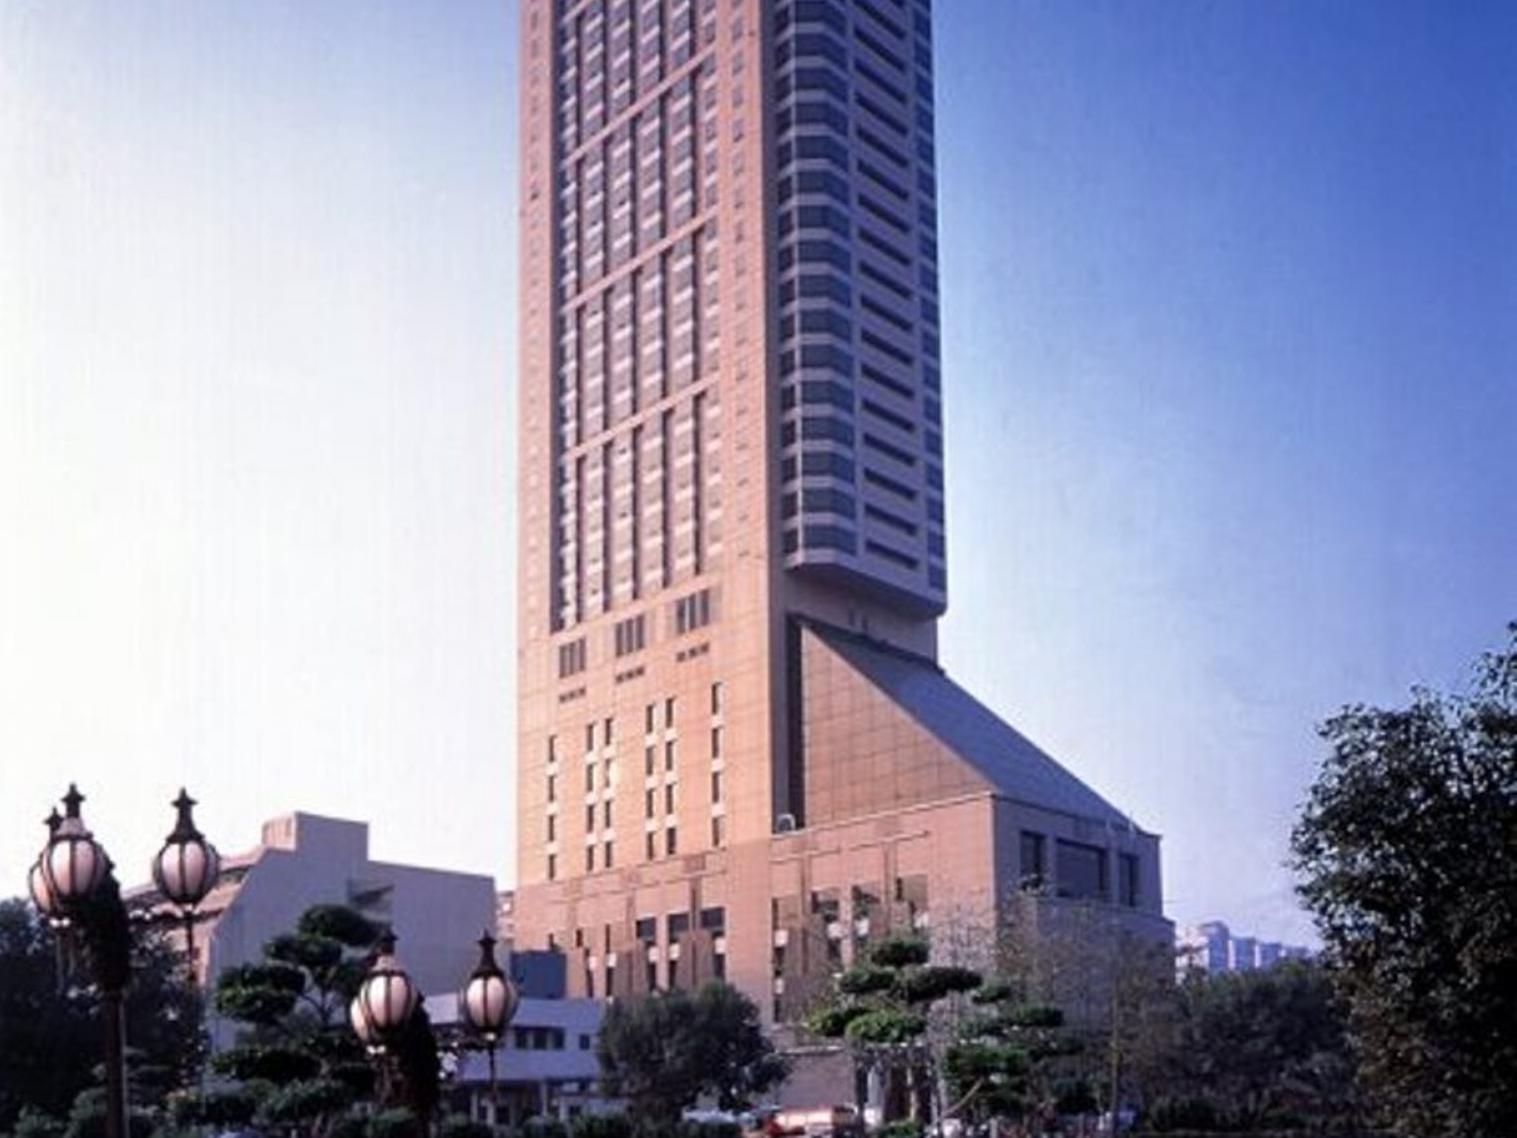 Han Hsien International Hotel Taiwan FAQ 2016, What facilities are there in Han Hsien International Hotel Taiwan 2016, What Languages Spoken are Supported in Han Hsien International Hotel Taiwan 2016, Which payment cards are accepted in Han Hsien International Hotel Taiwan , Taiwan Han Hsien International Hotel room facilities and services Q&A 2016, Taiwan Han Hsien International Hotel online booking services 2016, Taiwan Han Hsien International Hotel address 2016, Taiwan Han Hsien International Hotel telephone number 2016,Taiwan Han Hsien International Hotel map 2016, Taiwan Han Hsien International Hotel traffic guide 2016, how to go Taiwan Han Hsien International Hotel, Taiwan Han Hsien International Hotel booking online 2016, Taiwan Han Hsien International Hotel room types 2016.